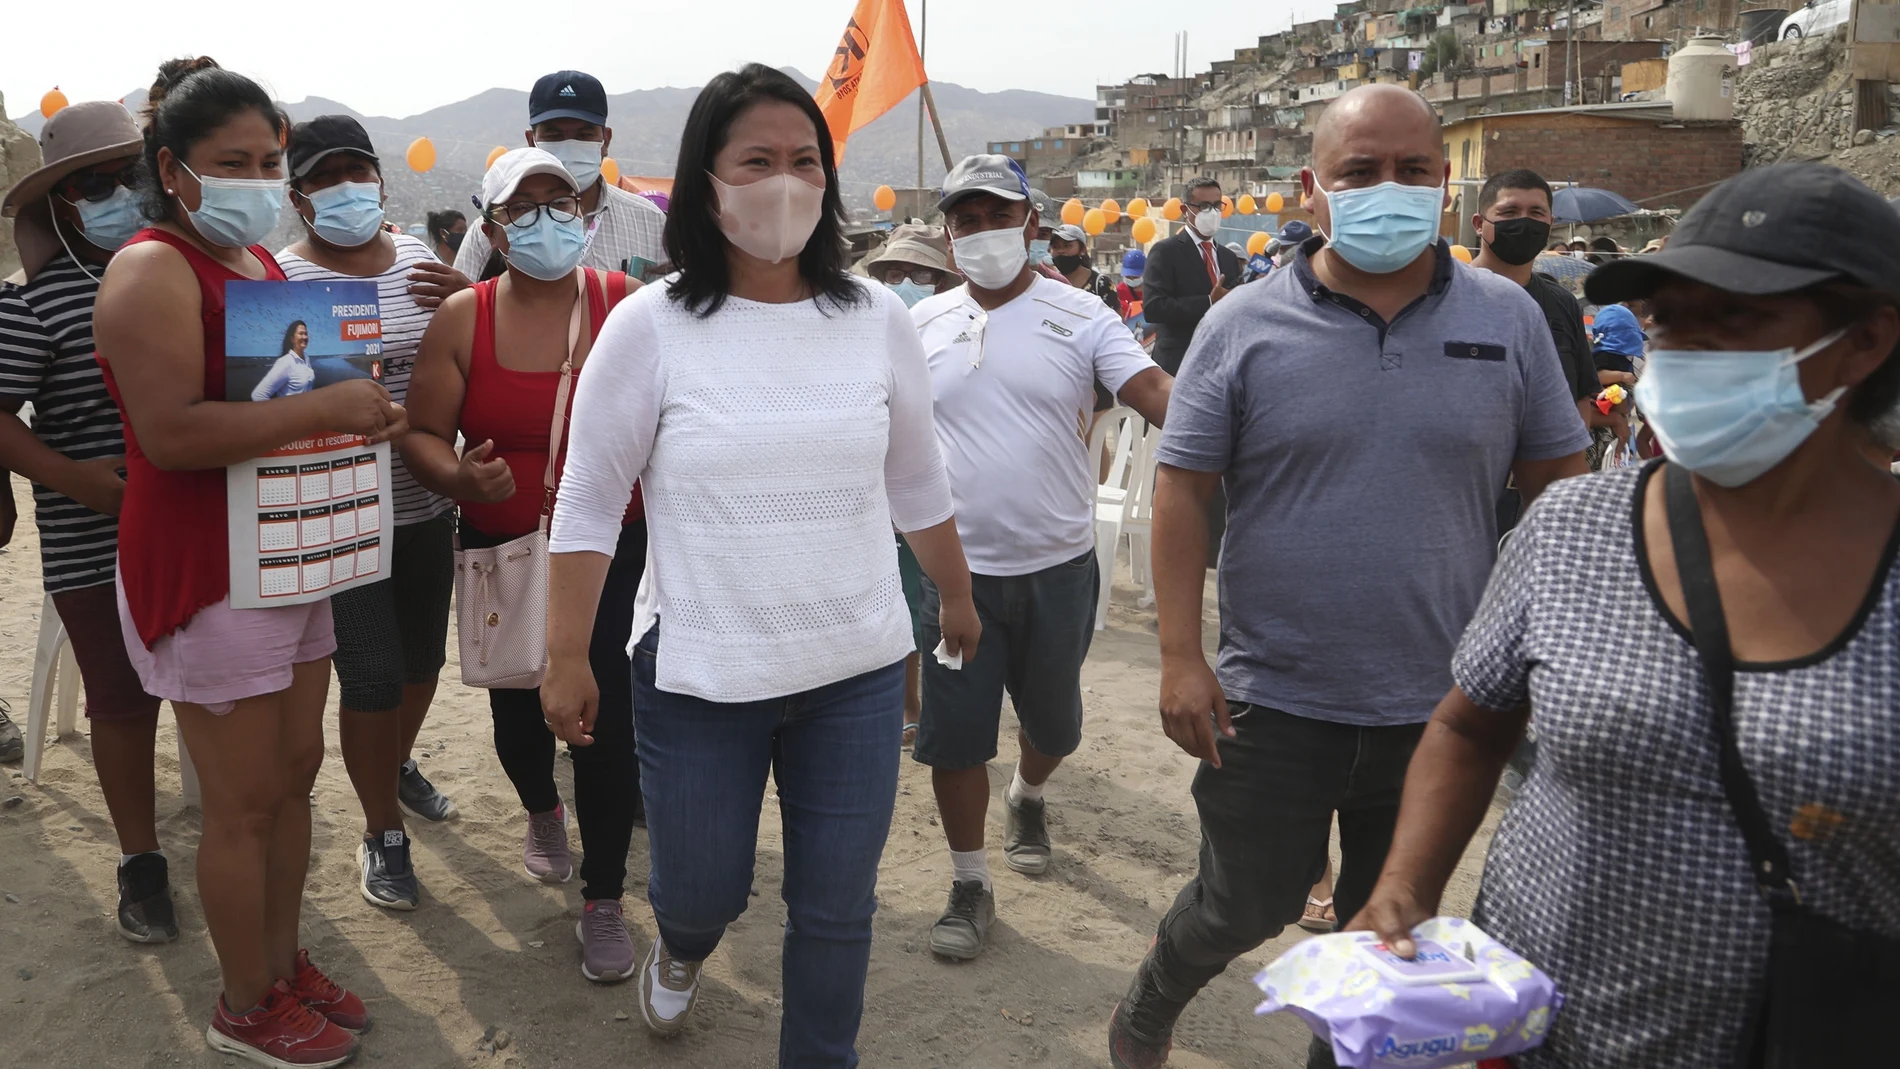 Wearing a mask to curb the spread of the new coronavirus, presidential candidate and daughter of imprisoned ex-President Alberto Fujimori, Keiko Fujimori, of the Popular Force party, campaigns in San Juan de Lurigancho on the outskirts of Lima, Peru, Tuesday, March 16, 2021. Peru's general election is set for April 11. (AP Photo/Martin Mejia)